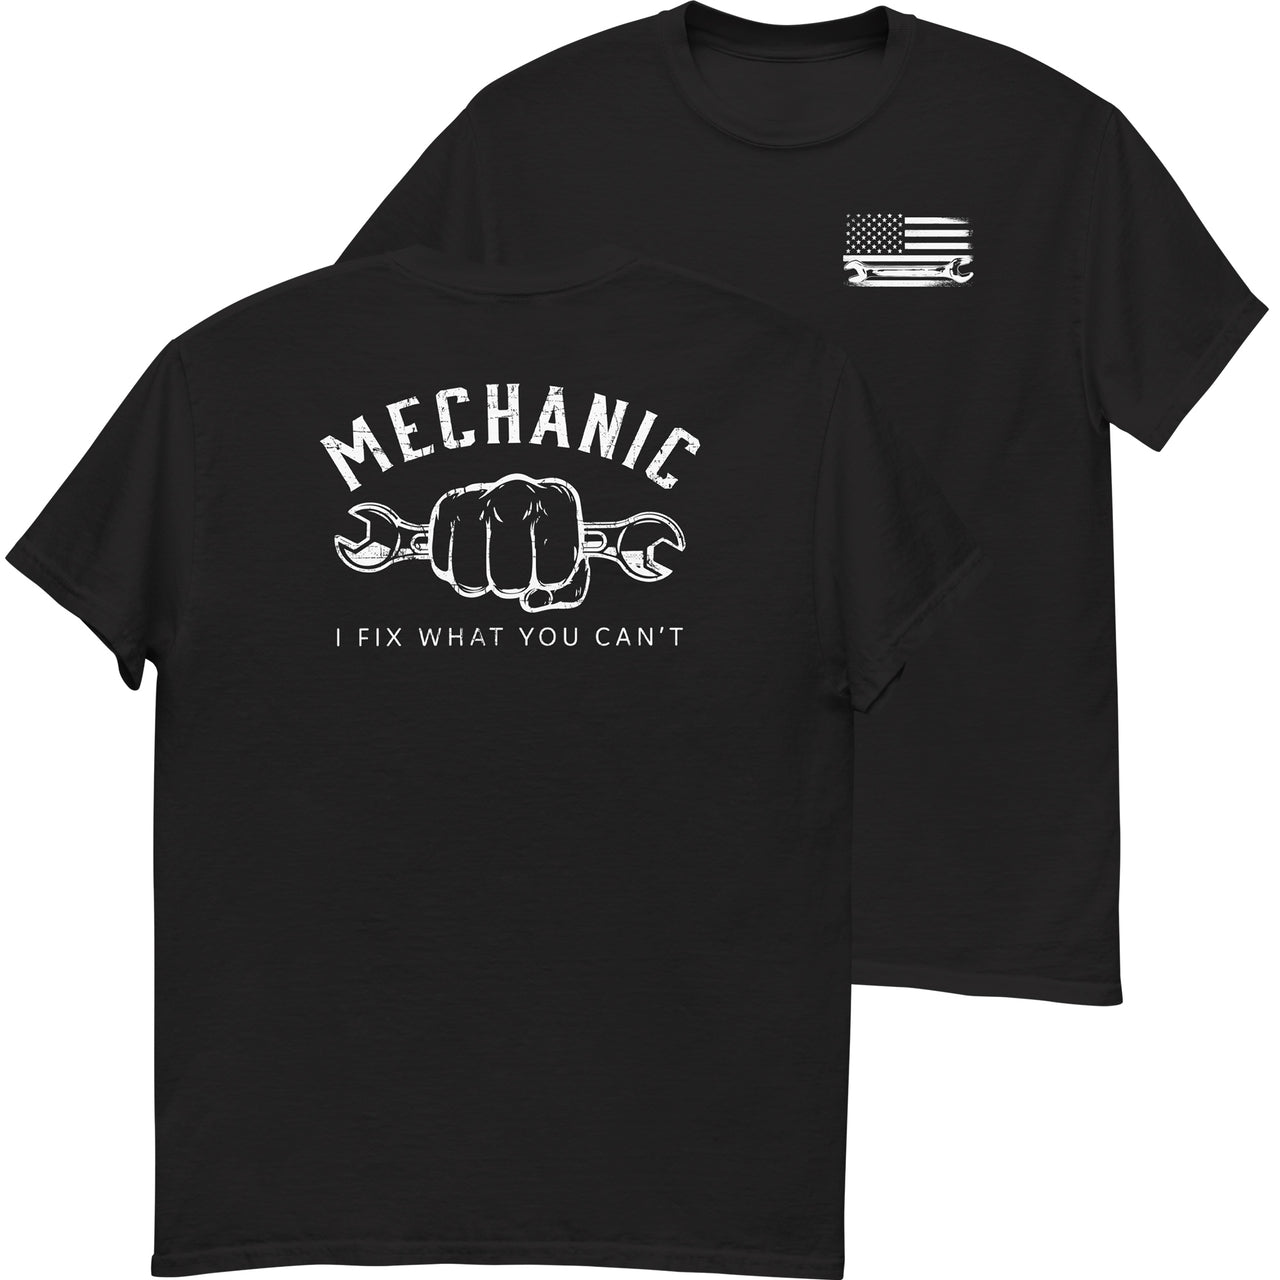 Mechanic T-Shirt - I Fix What You Cant in black